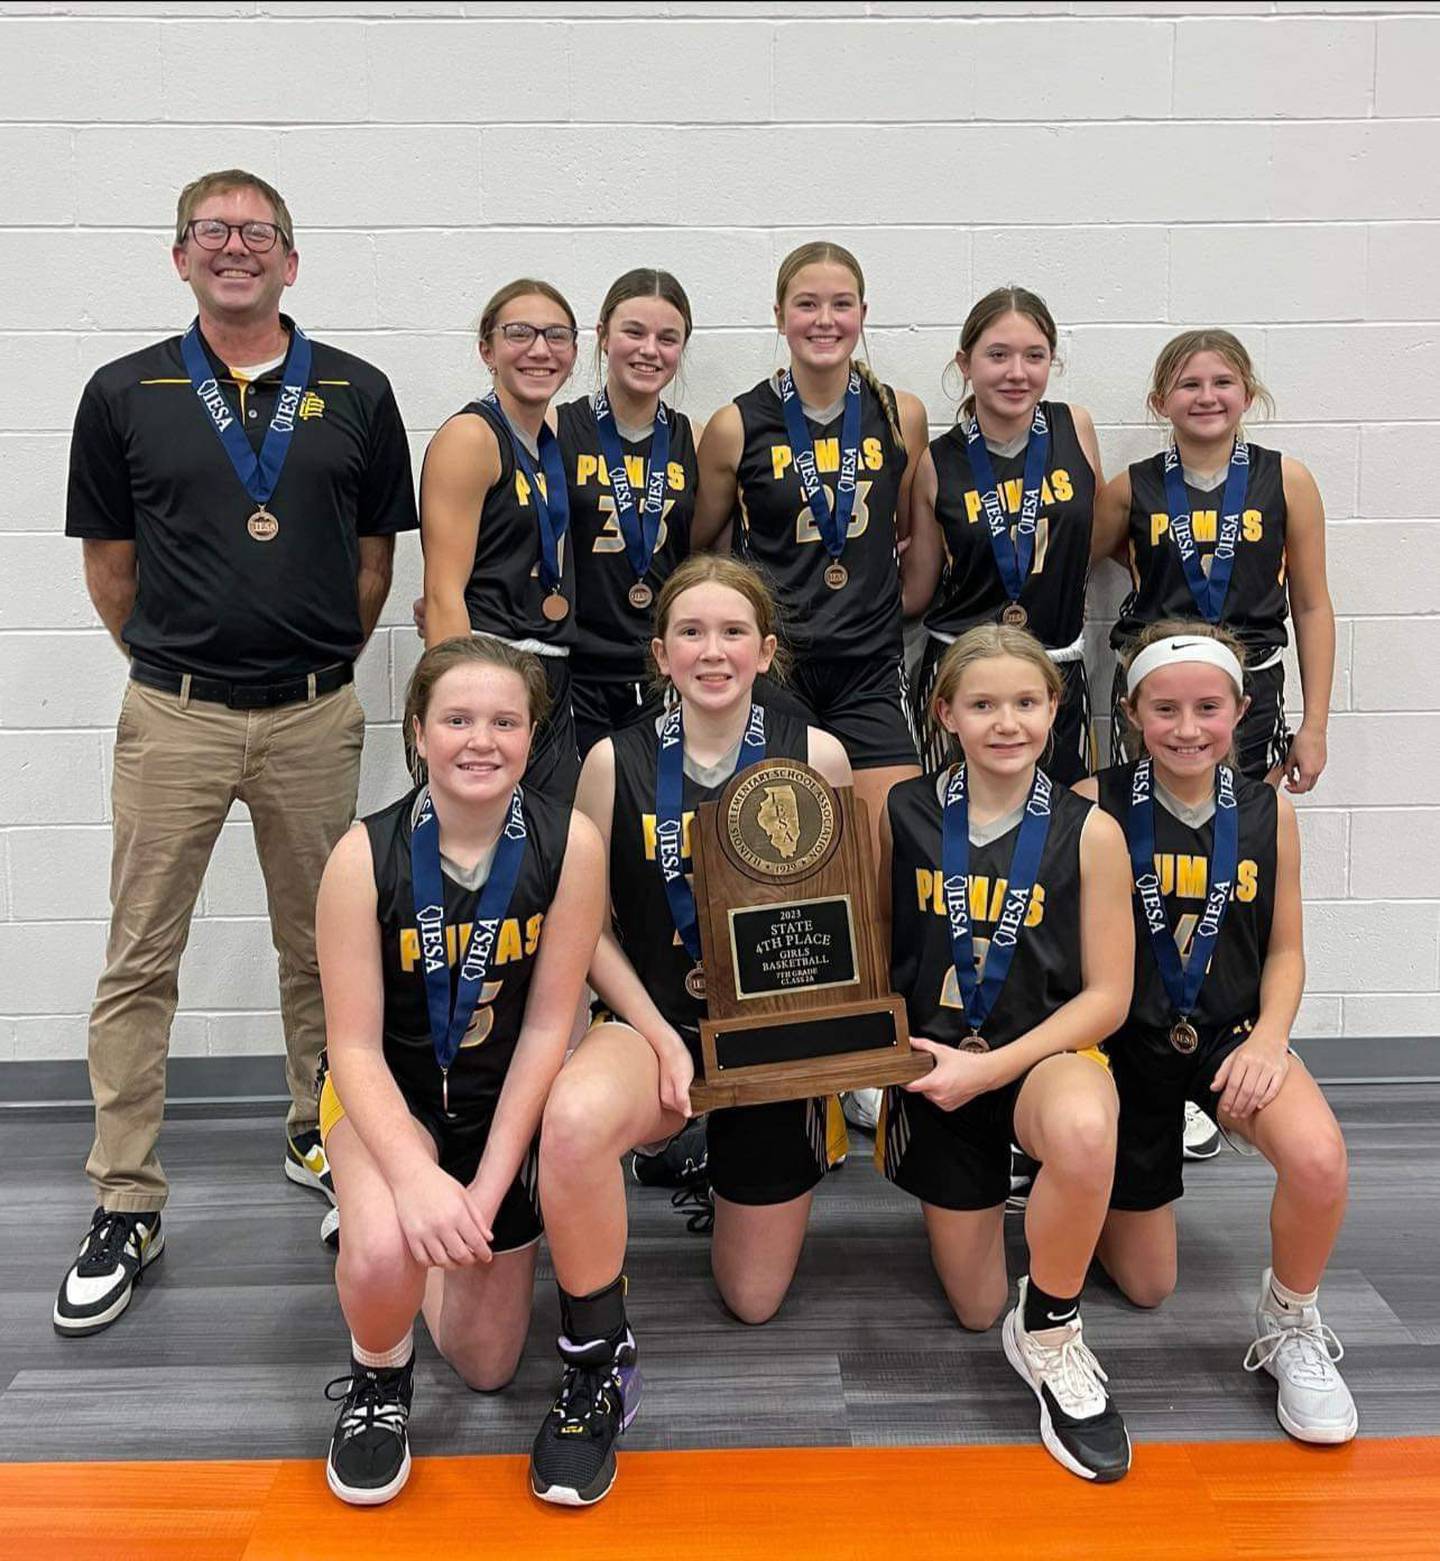 The Putnam County seventh grade girls basketball team placed fourth in the IESA Class 2A state tournament. Pictured, back row (left to right): Coach Nick Heuser, Hannah Heiberger, McKlay Gensini, Tula Rue, Millie Harris and Avery Lenkaitis. Front row: Murphy Hopkins, Kami Nauman, Makenna Wrobleski and Anniston Judd.